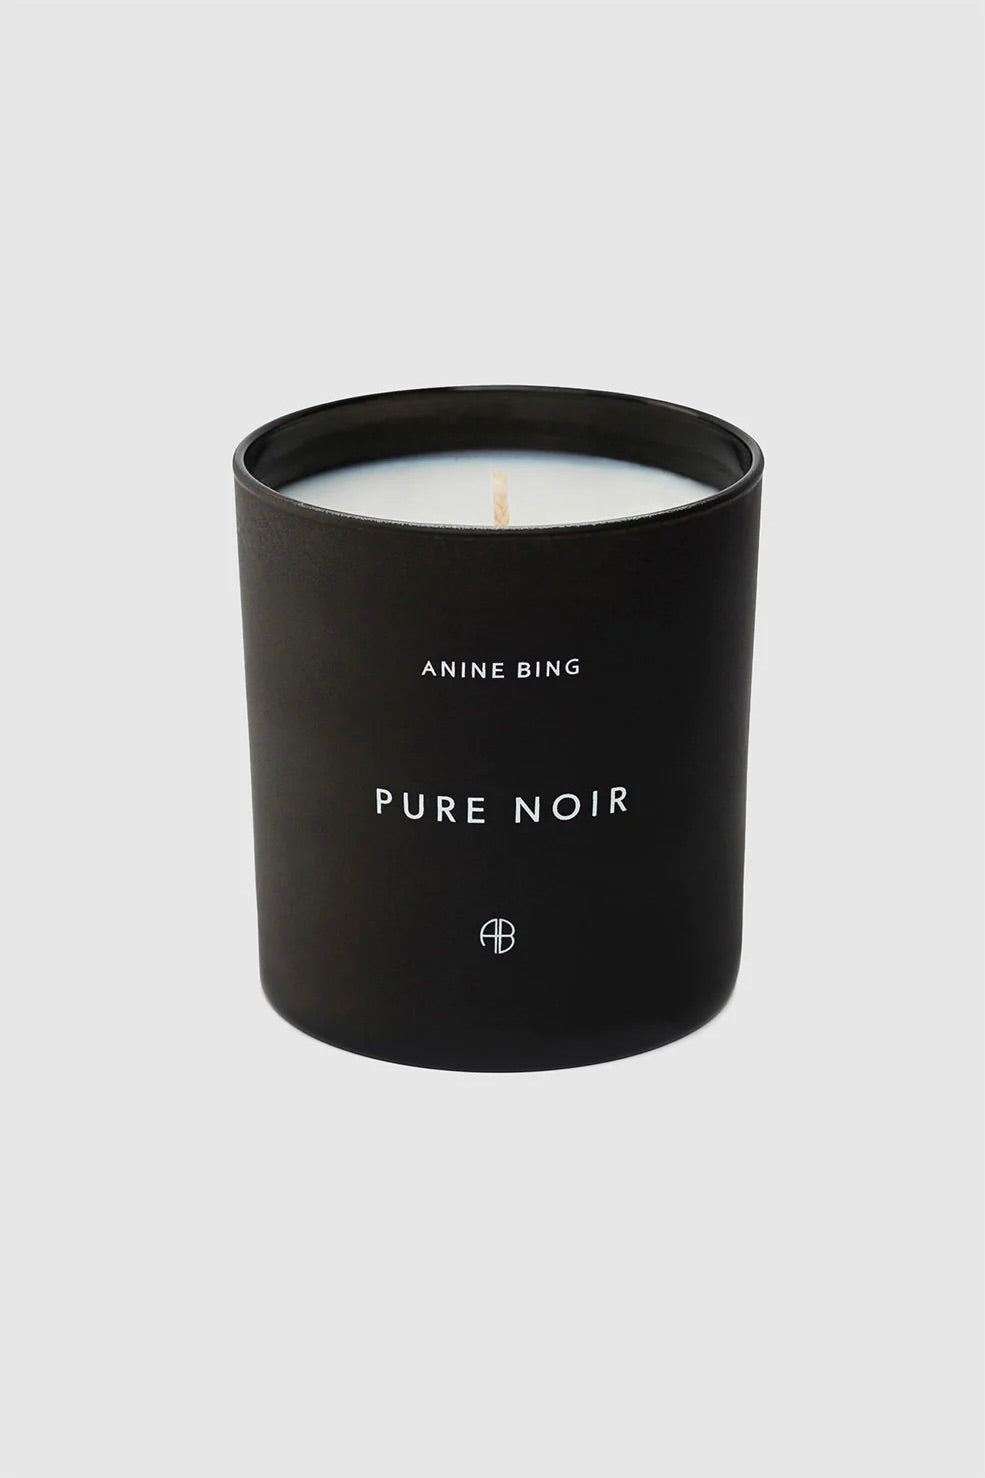 ANINE BING - Pure Noir Candle - Dale